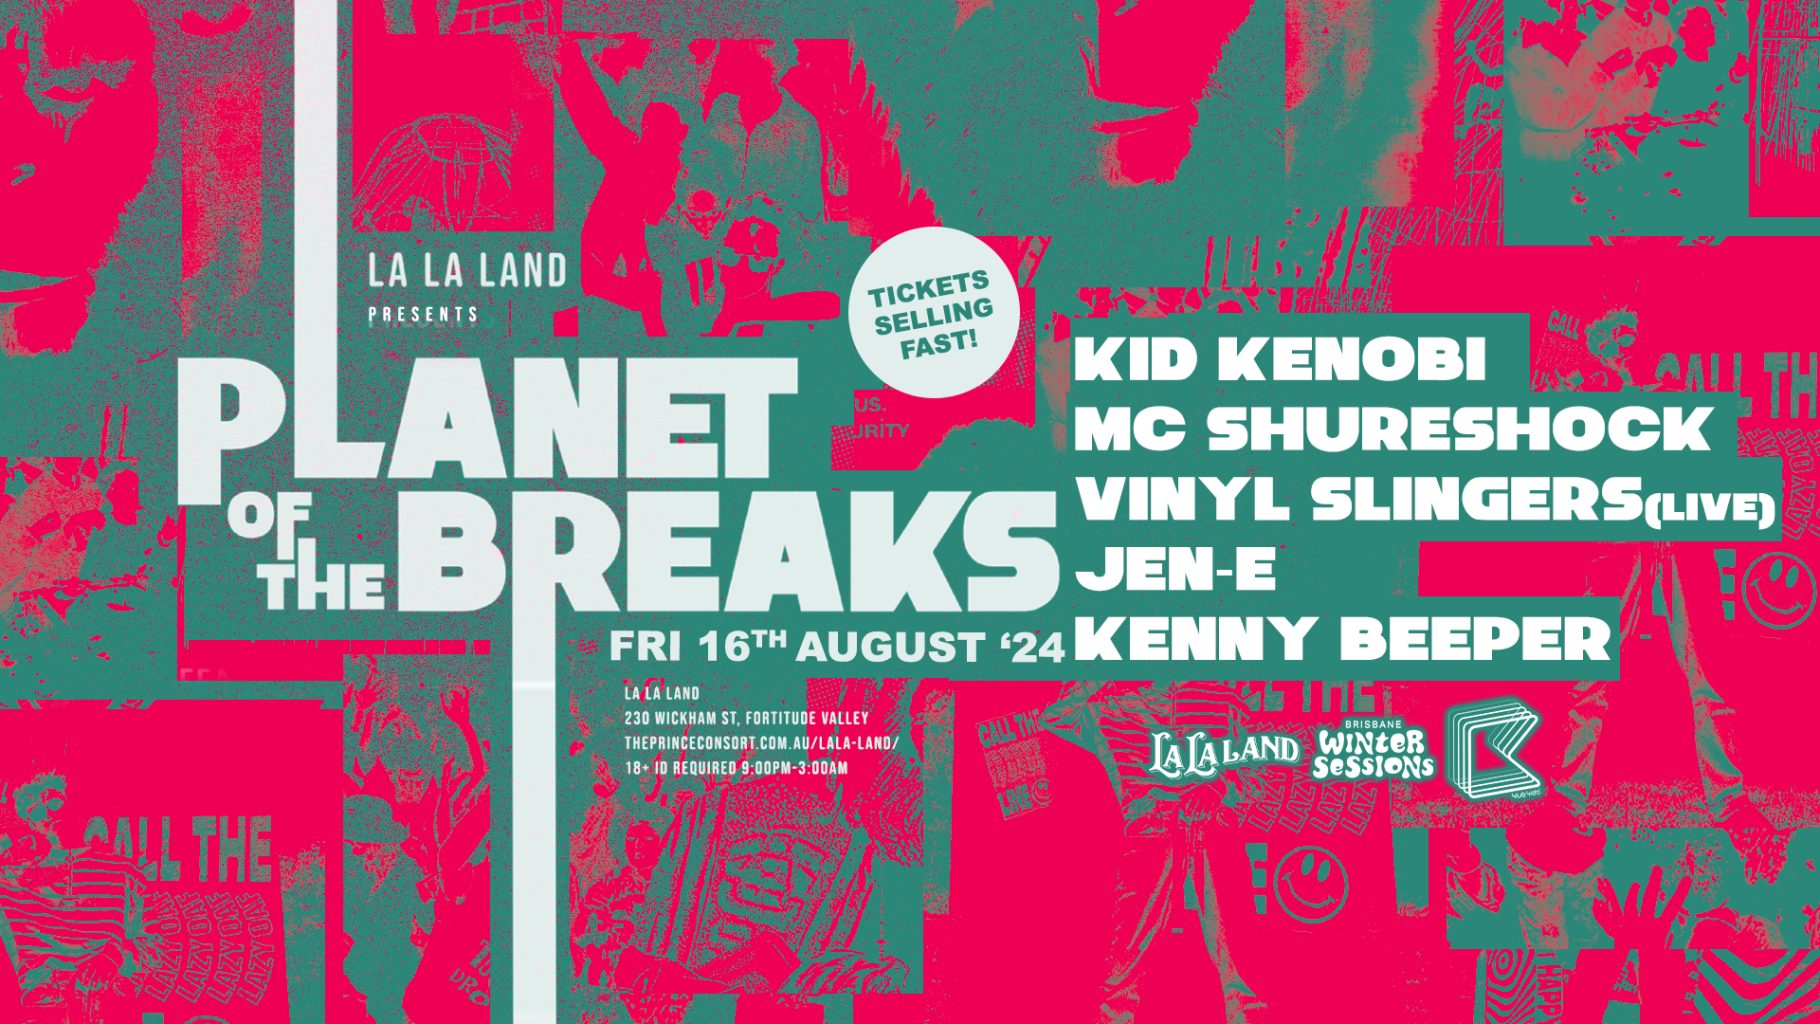 Planet of the Breaks | Events at The Prince Consort